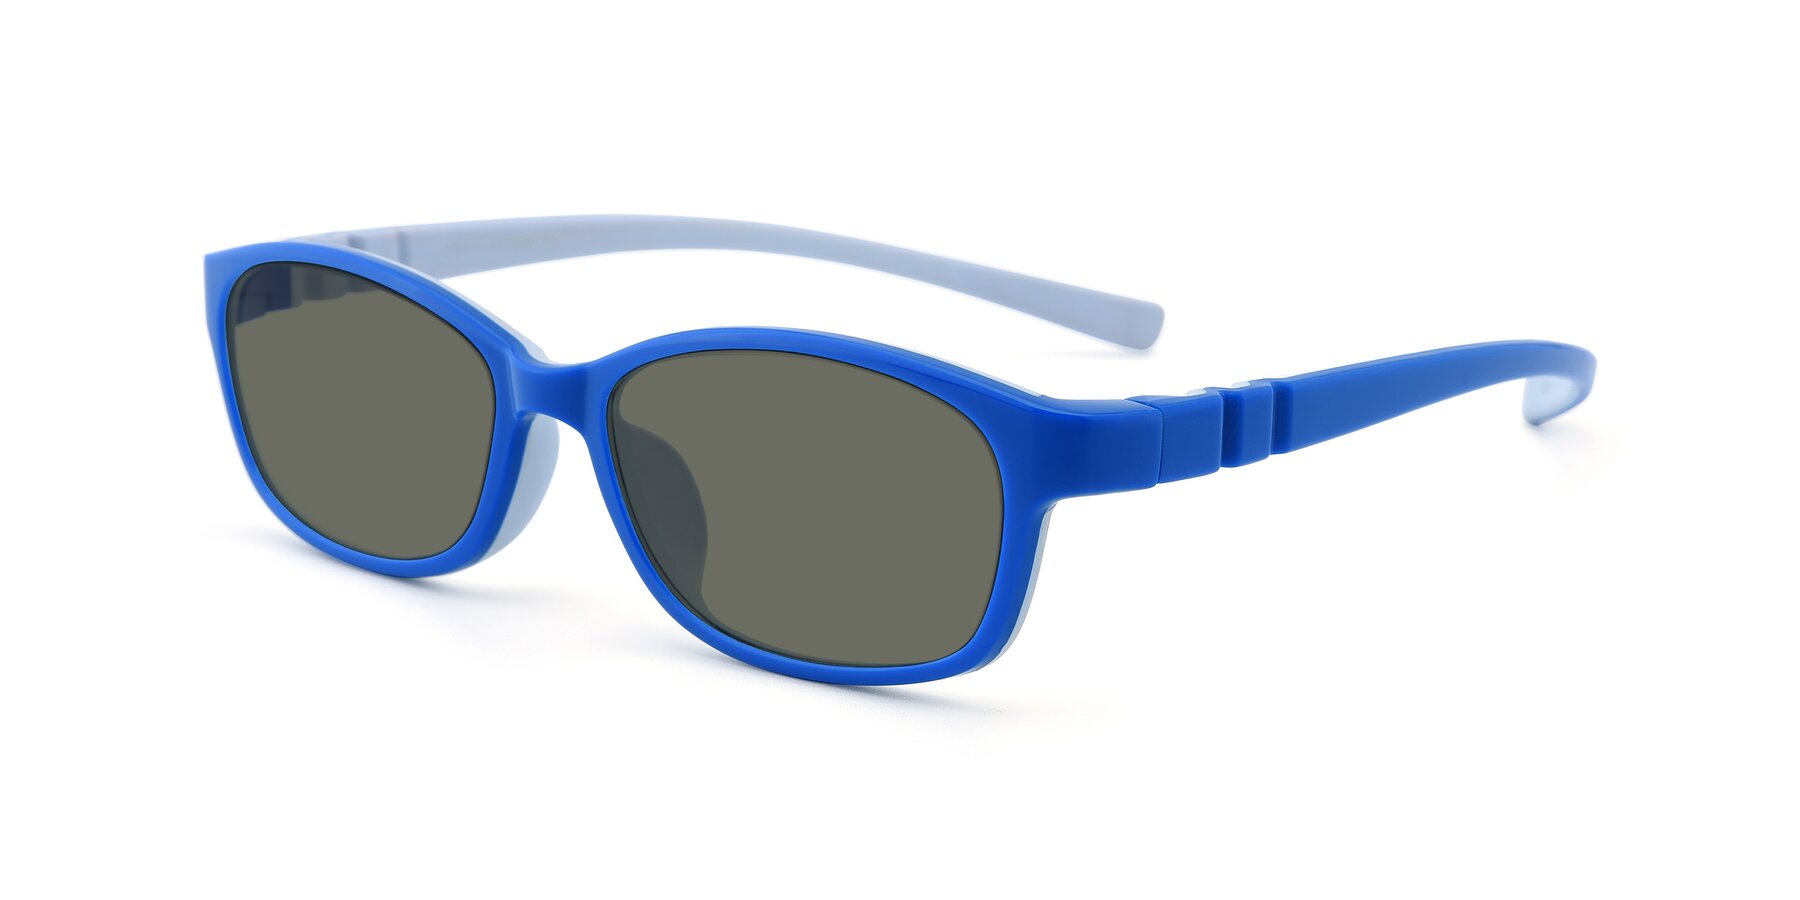 Angle of 556 in Blue-Gray with Gray Polarized Lenses